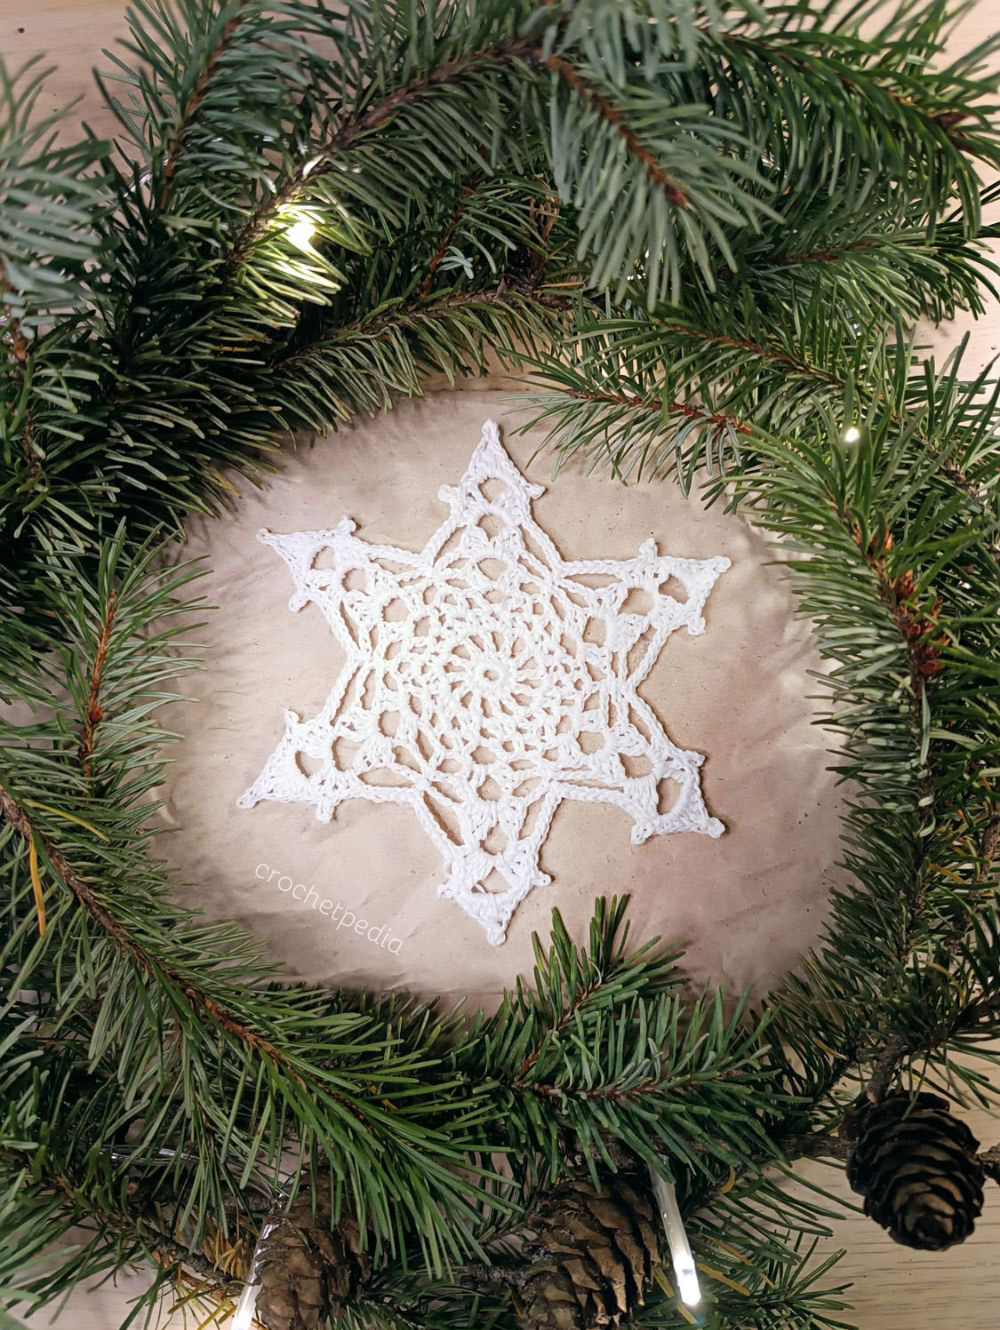 A snowflake is placed in a wreath of pine cones.